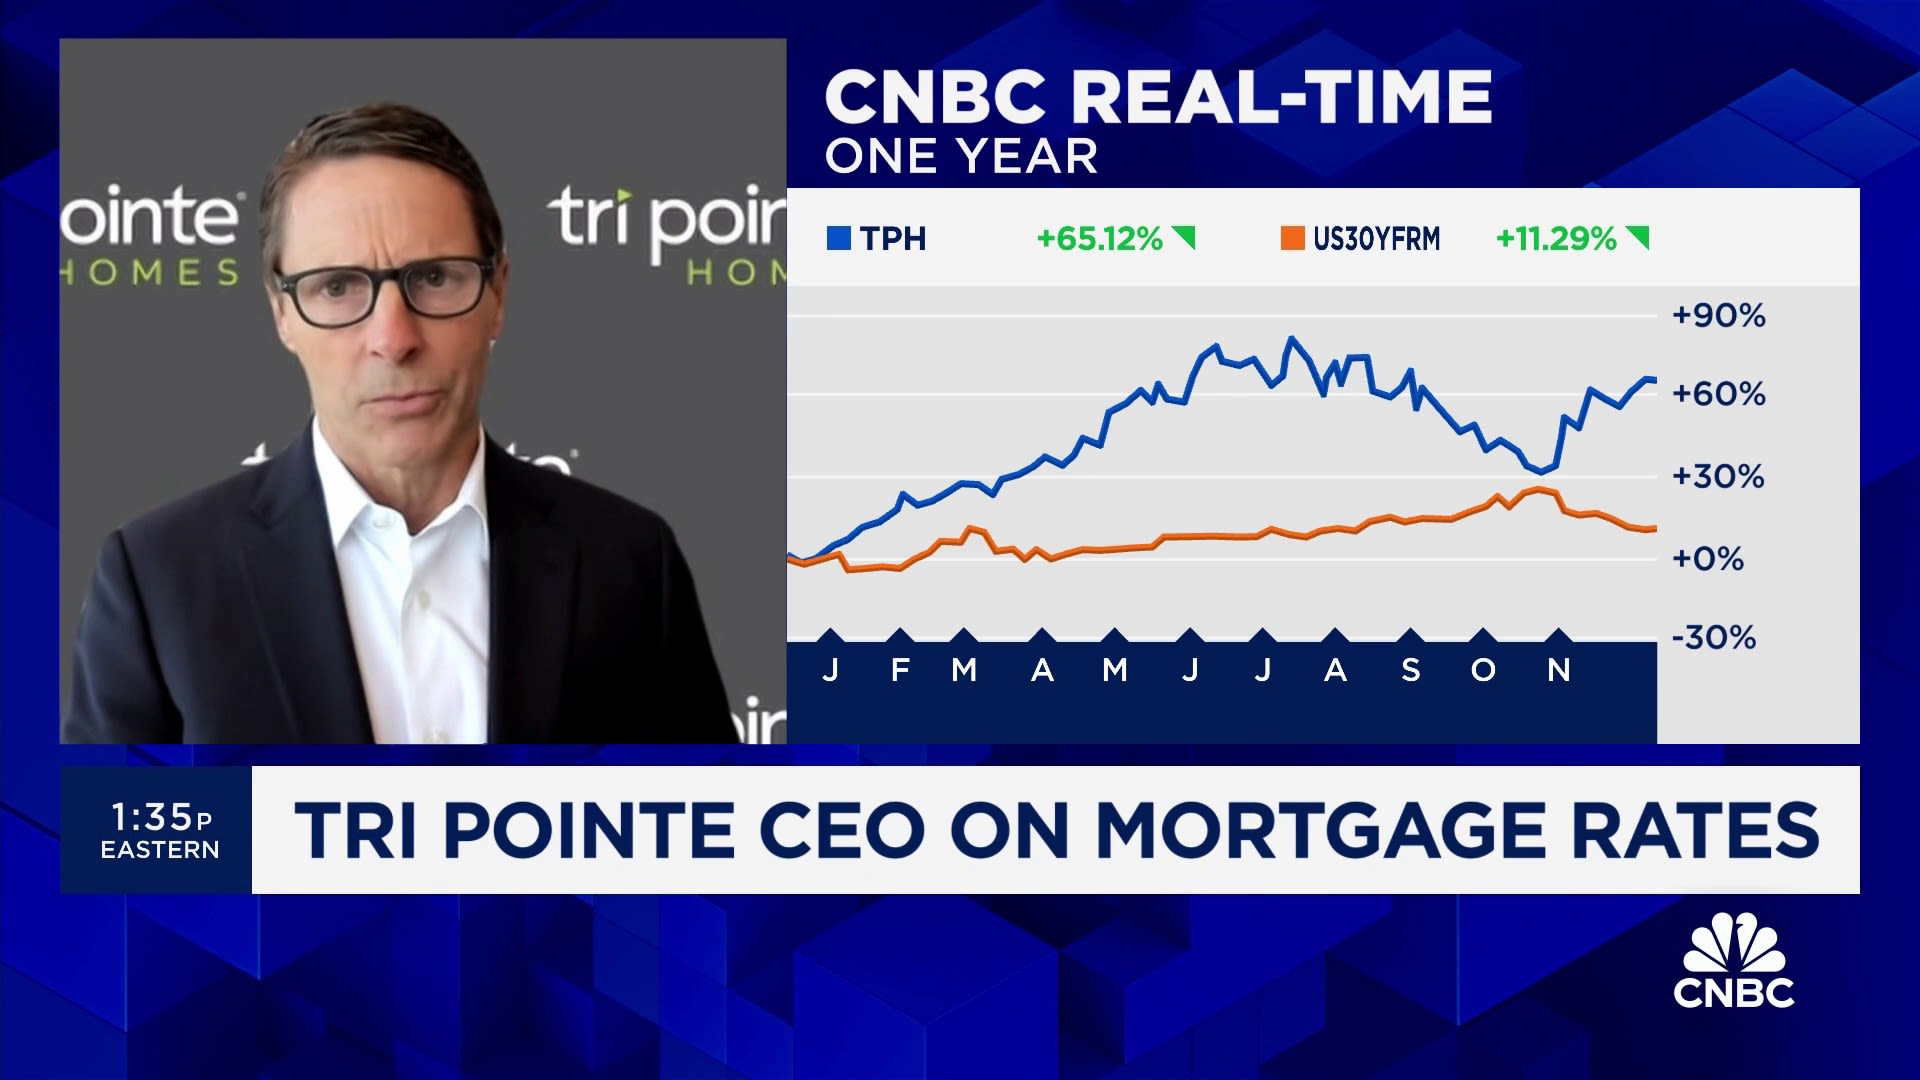 Rates are going to stay where they are for the foreseeable future, says Tri Pointe CEO Doug Bauer